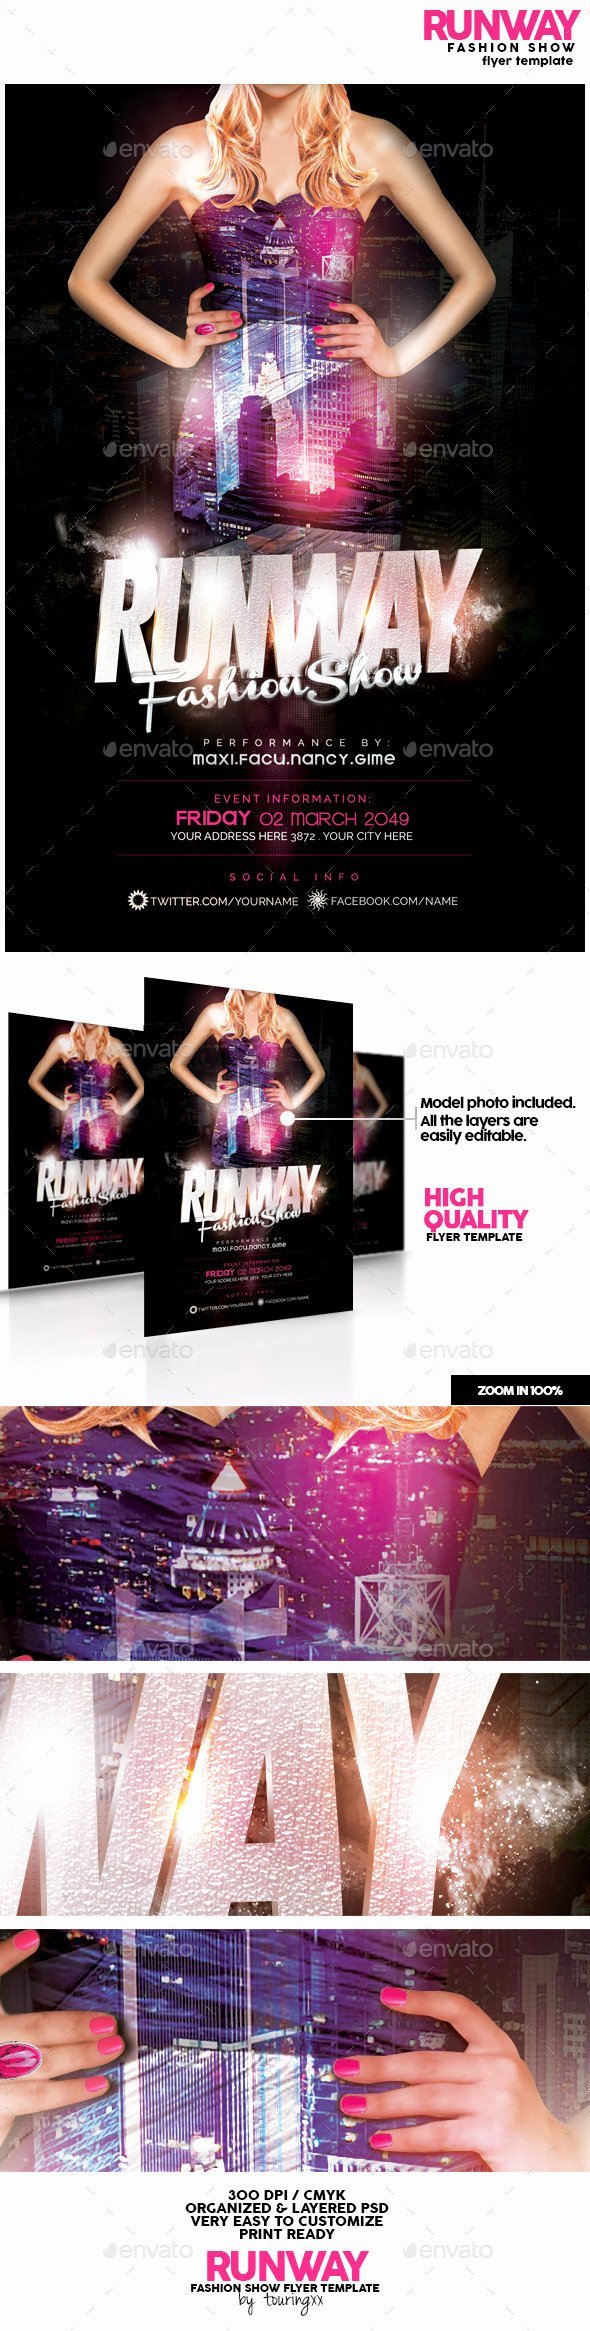 Runway Fashion Show Flyer Template by touringxx